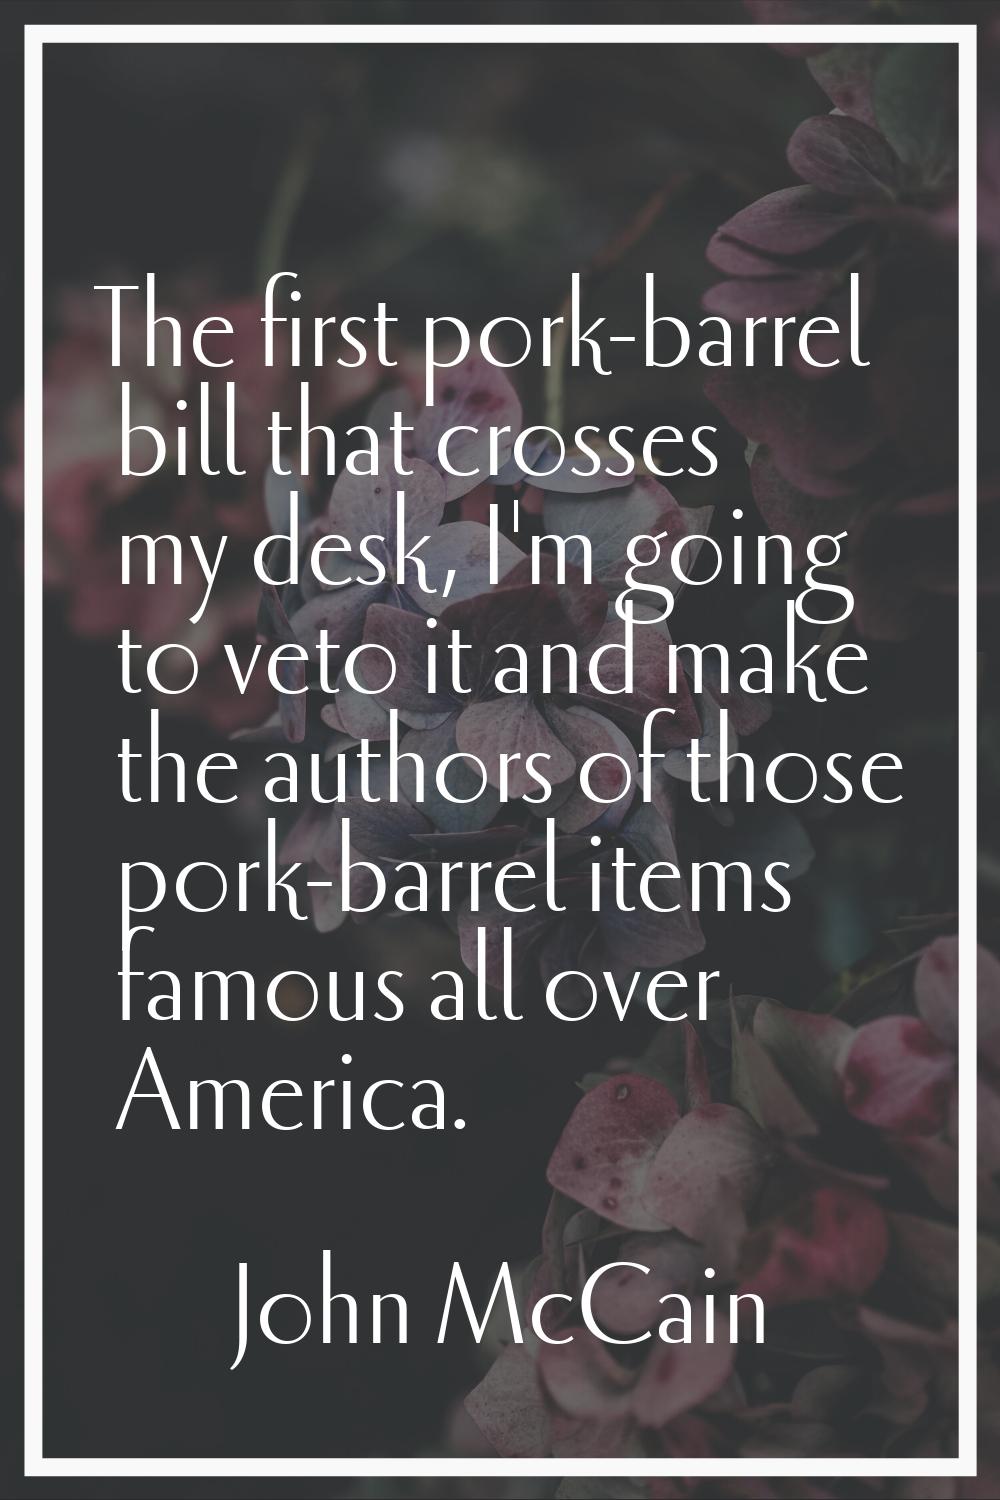 The first pork-barrel bill that crosses my desk, I'm going to veto it and make the authors of those